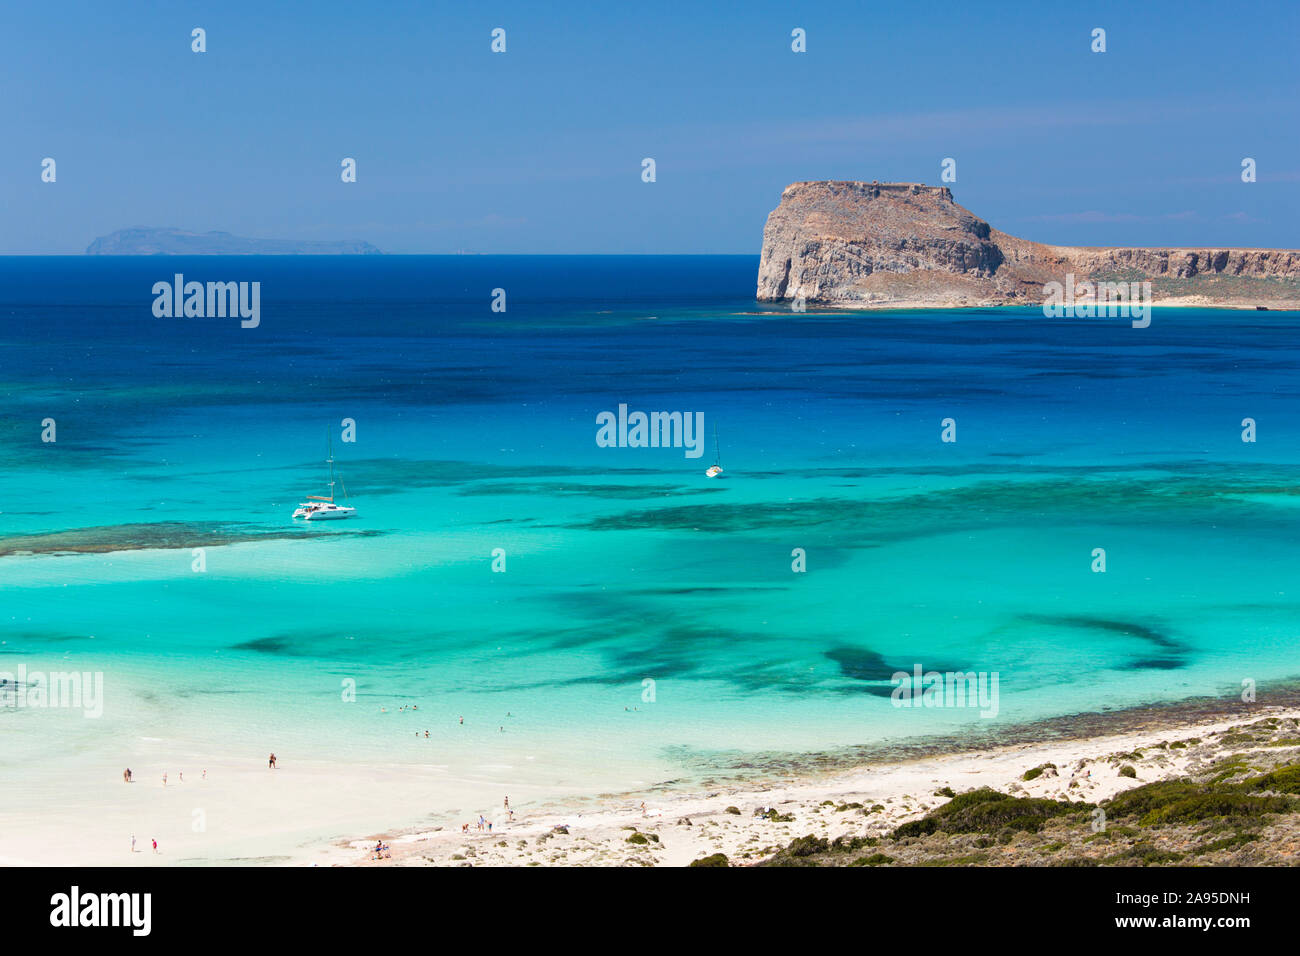 Balos, Chania, Crete, Greece. View over the clear turquoise waters of Gramvousa Bay from hillside above the beach. Stock Photo